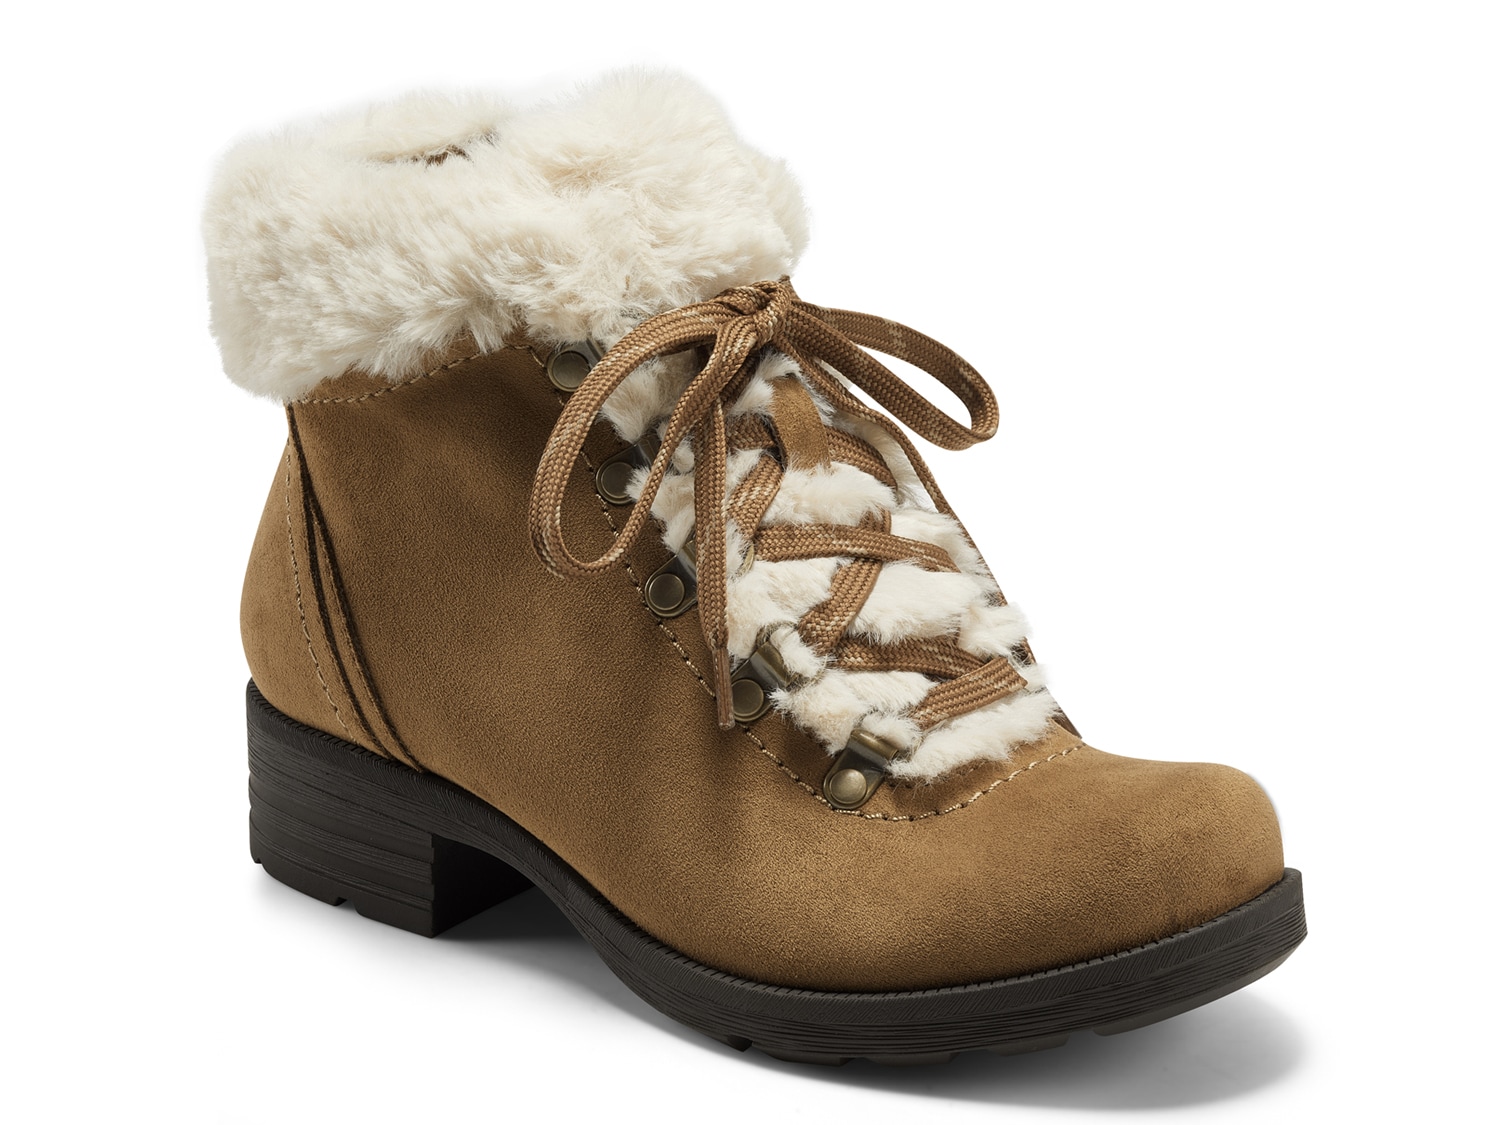 Earth Rada Women's Leather Faux Fur Lined Lace-Up Booties